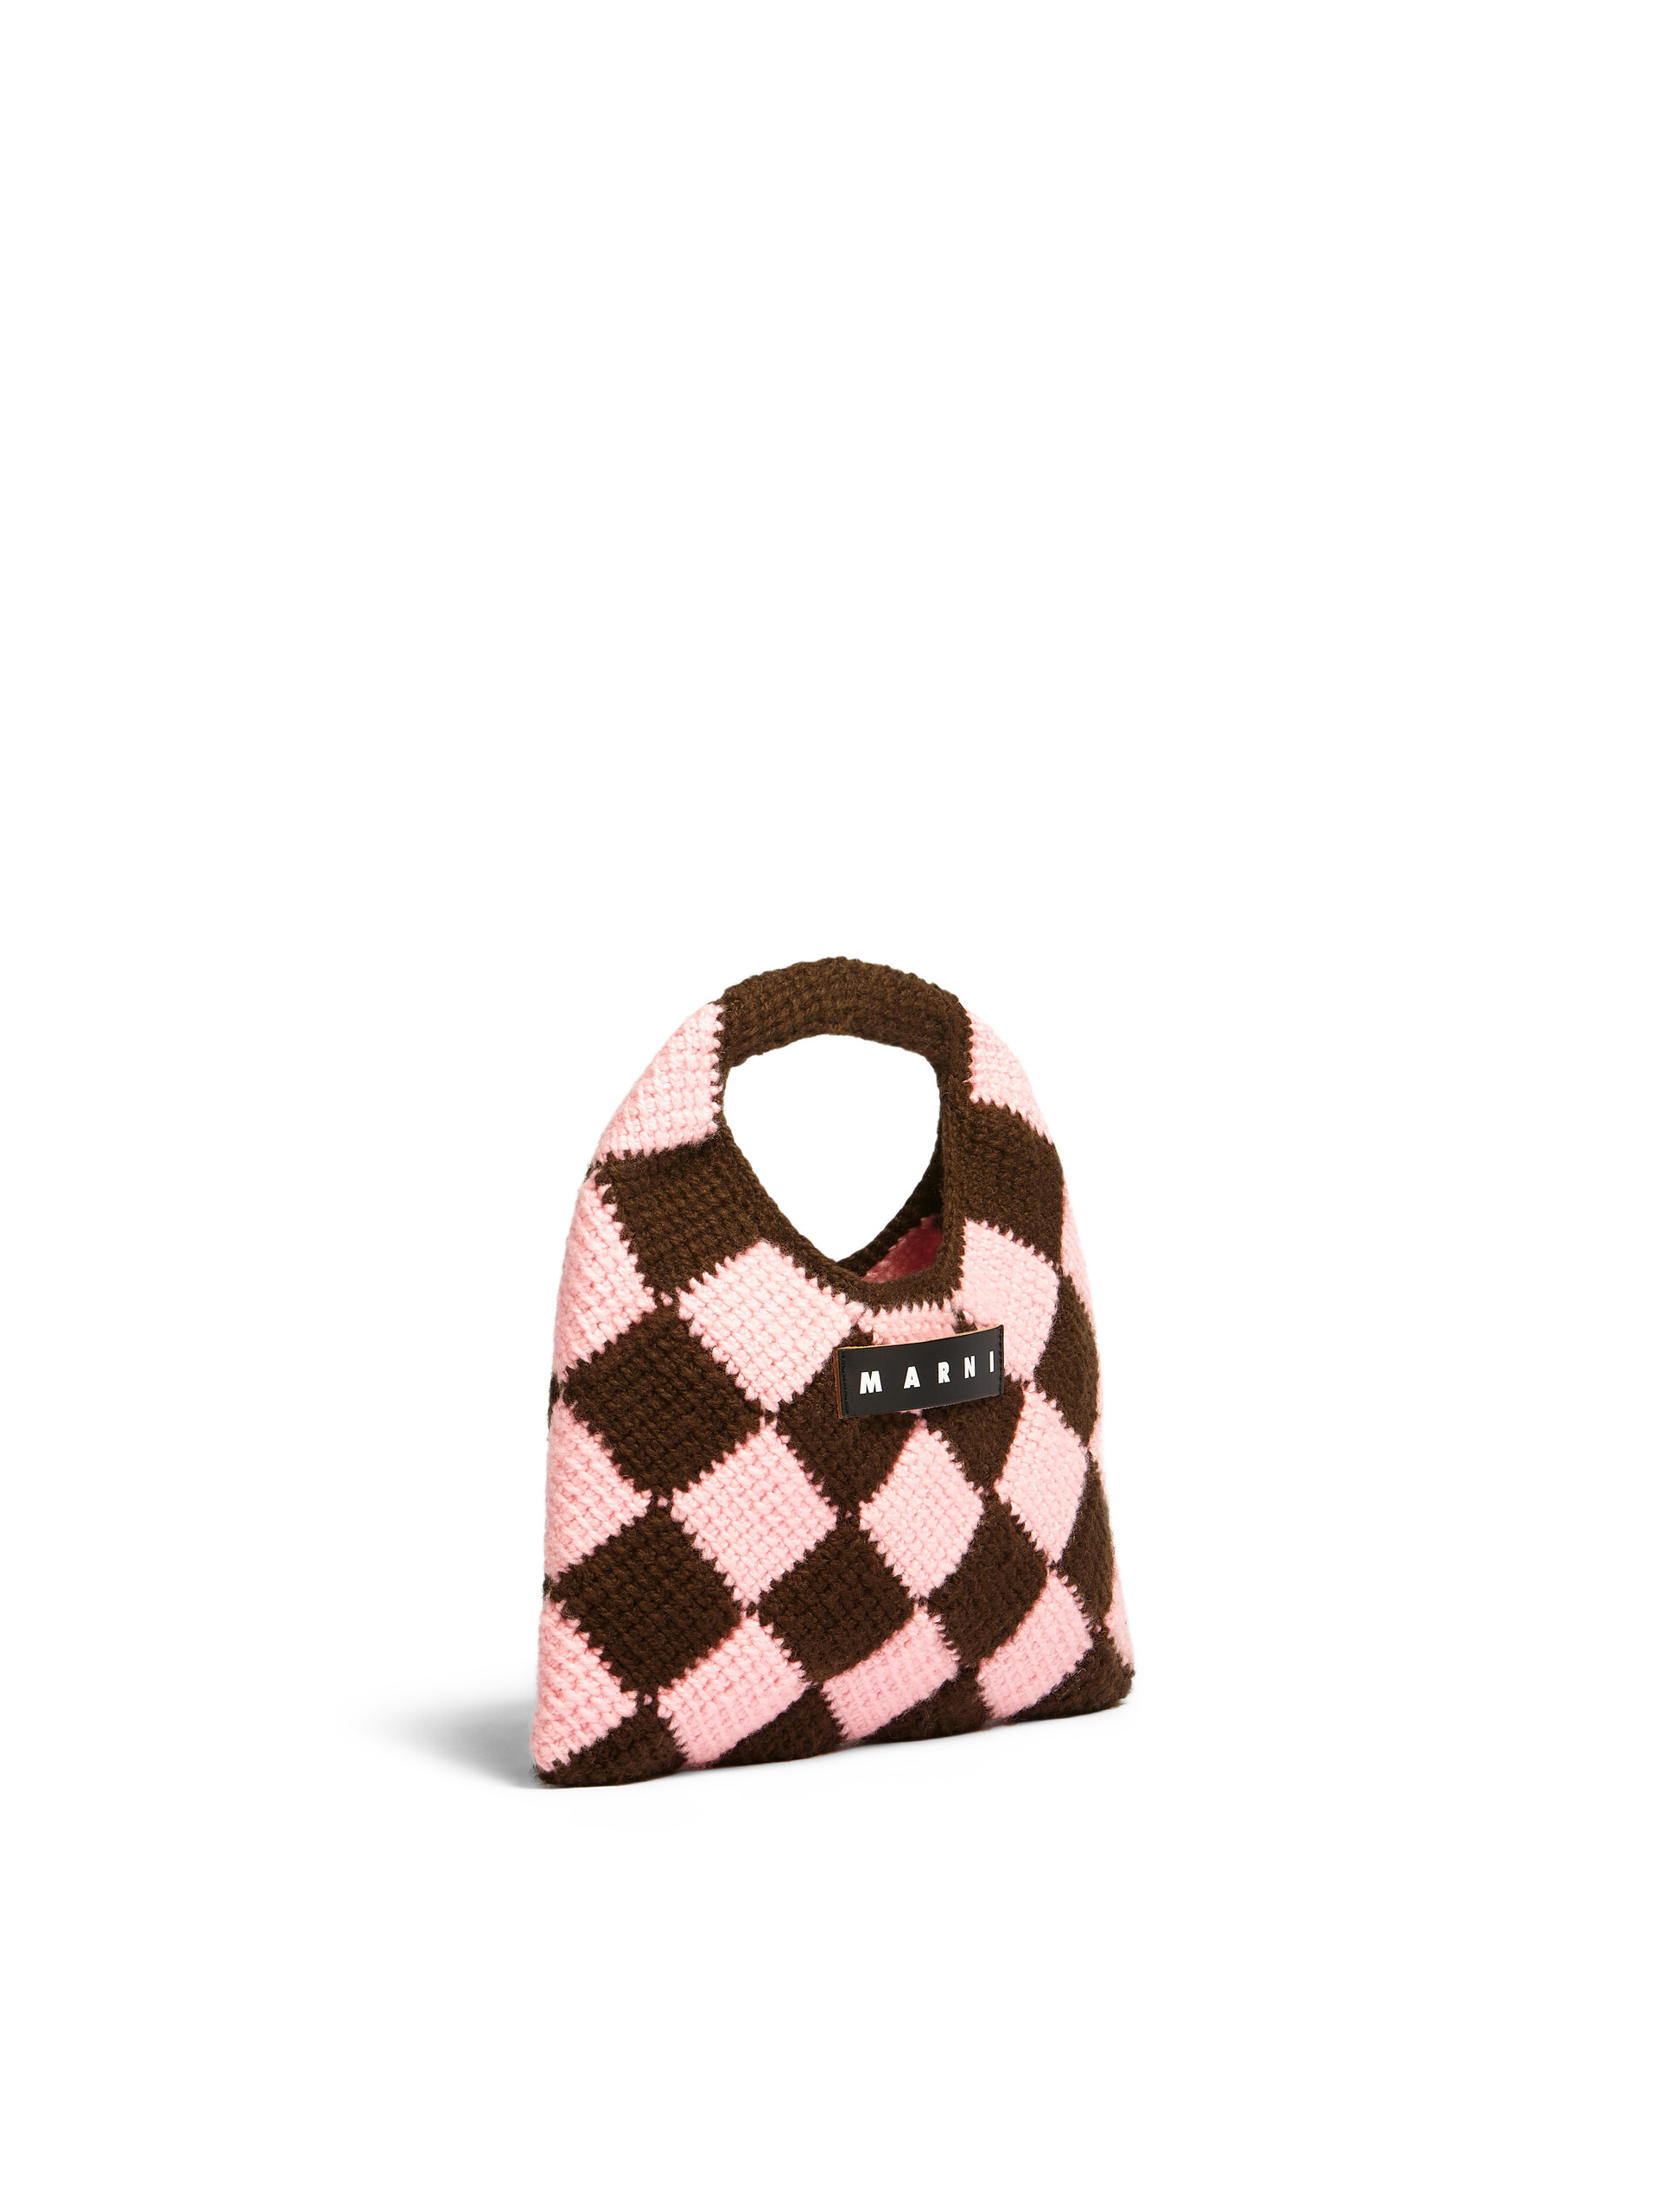 MARNI MARKET DIAMOND small bag in brown and pink tech wool - Bags - Image 2